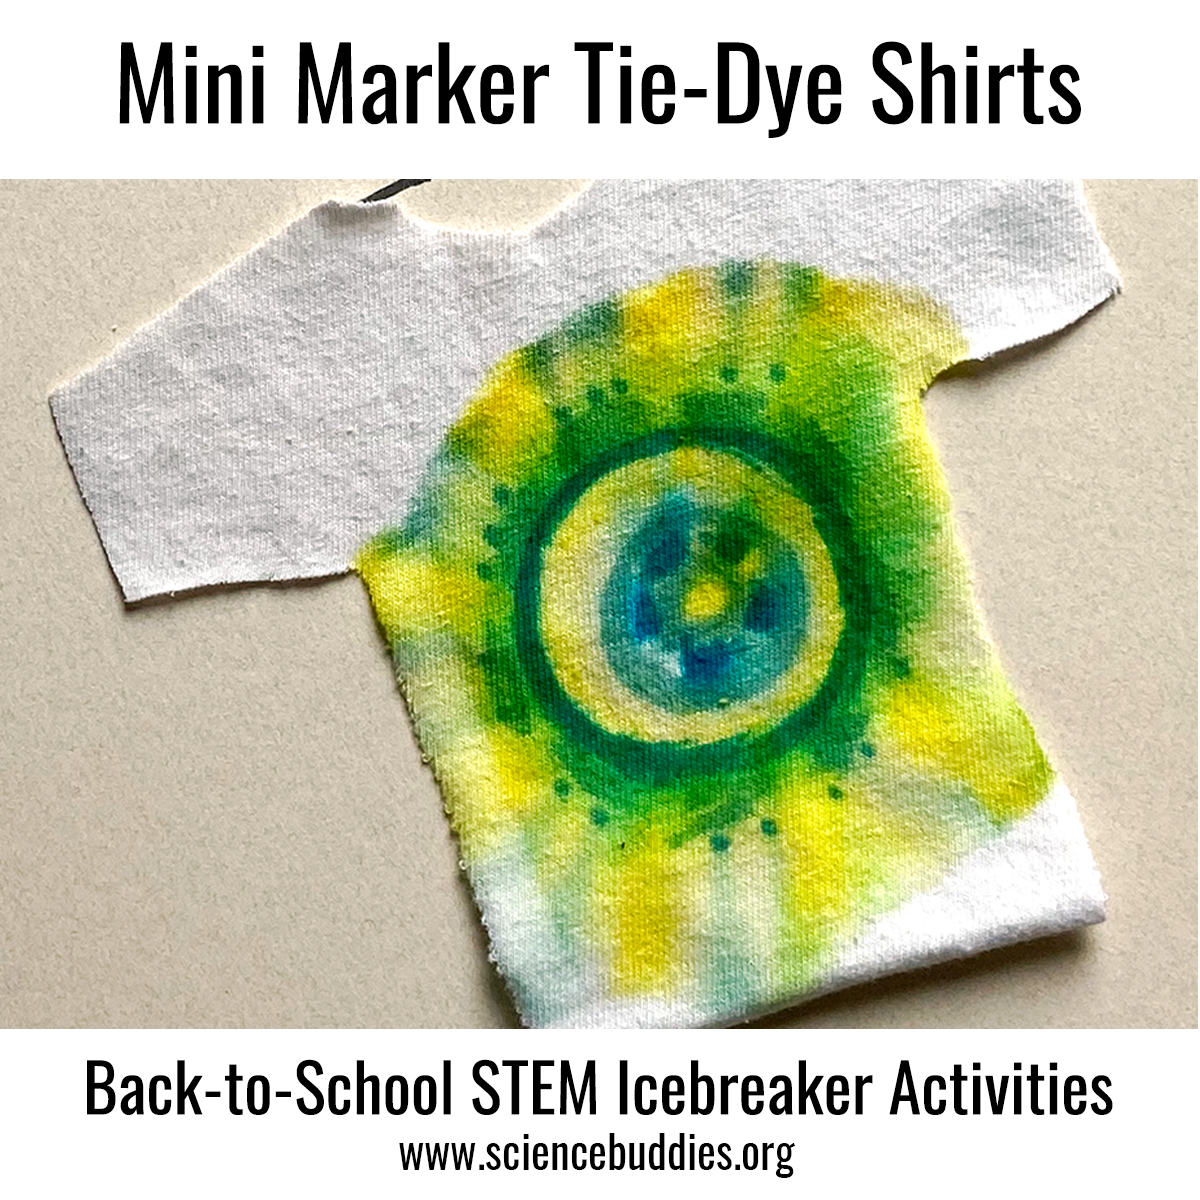 Mini marker tie-dye tshirt example - part of Icebreakers STEM Collection at Science Buddies